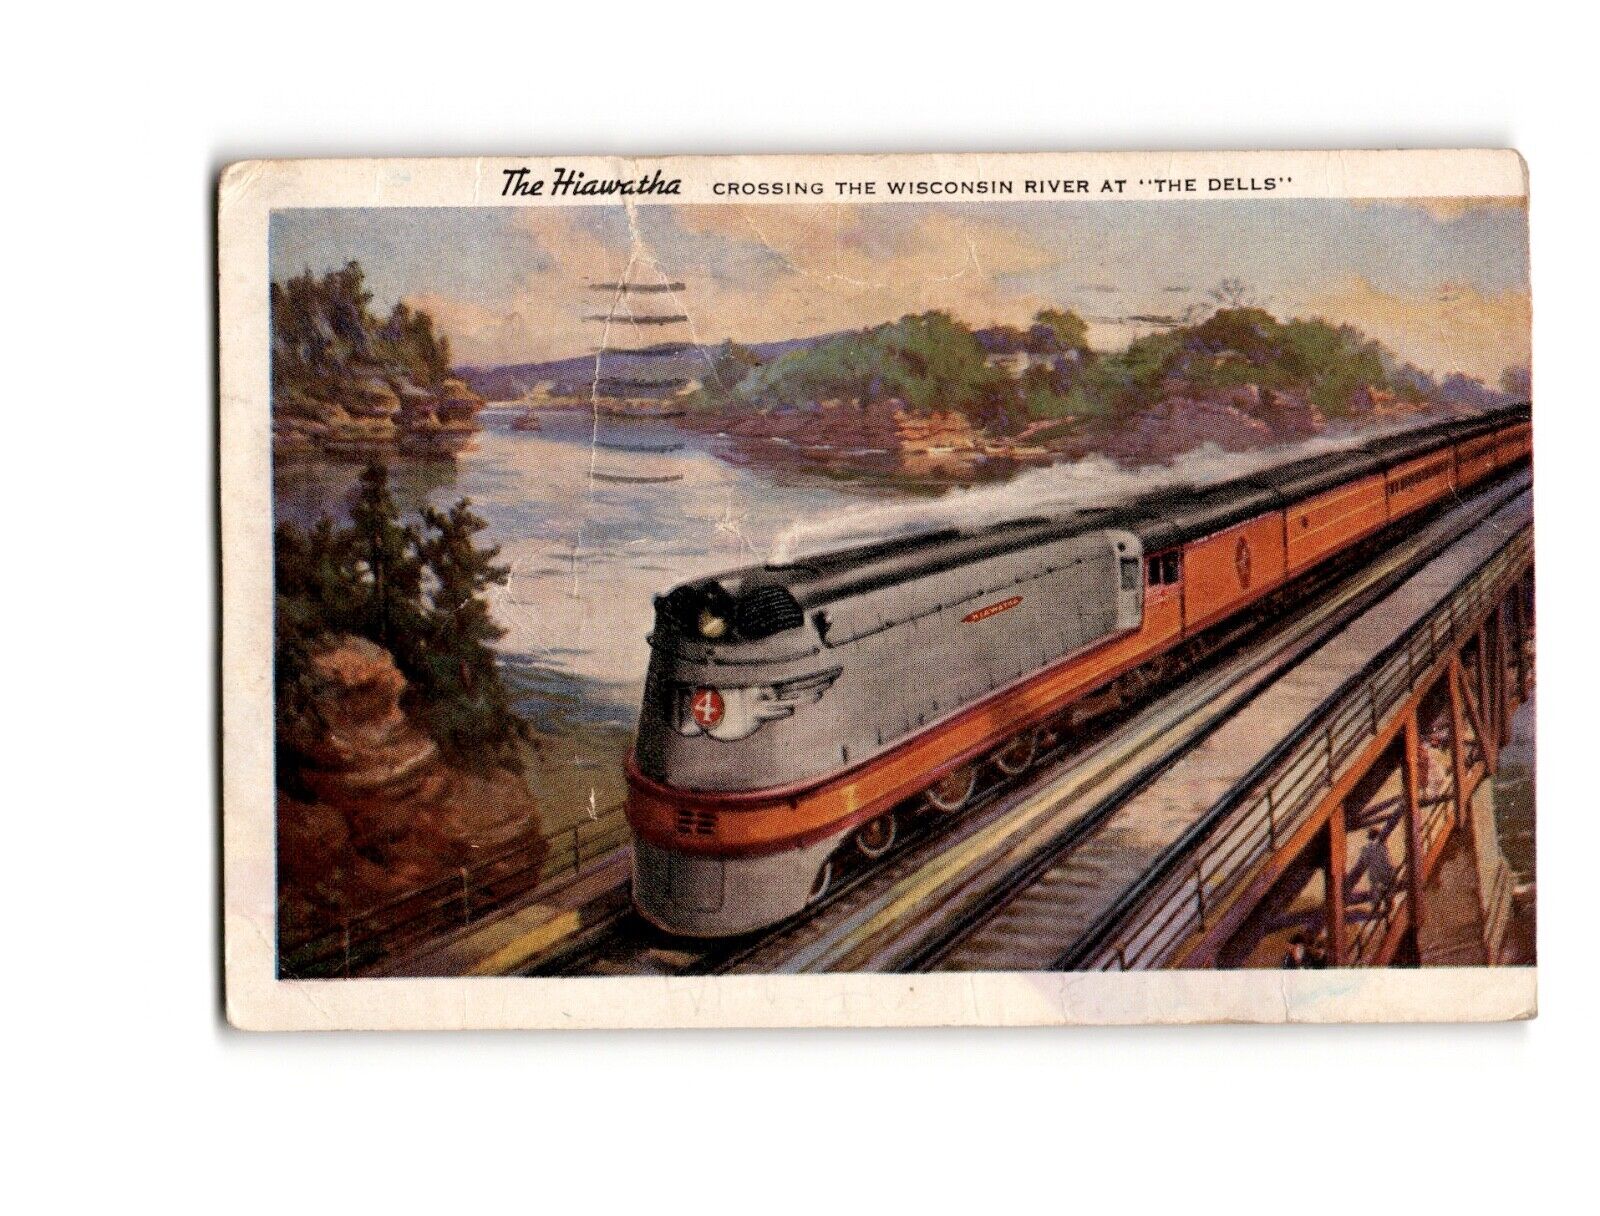 Vintage Postcard: The Hiawatha Train Crossing the Wisconsin River at 'The Dells'